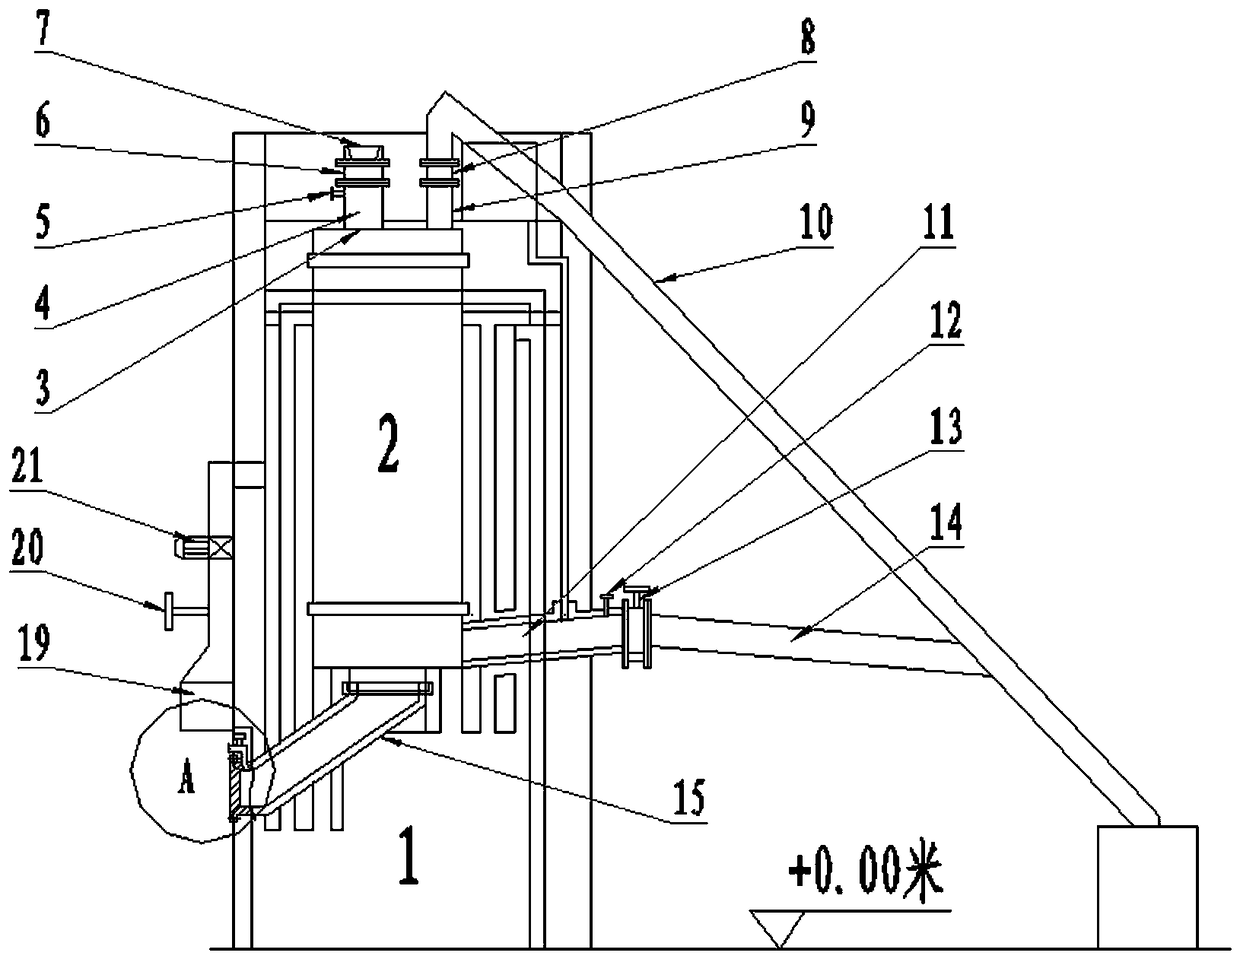 Carbon disulfide coke method continuous production process and equipment